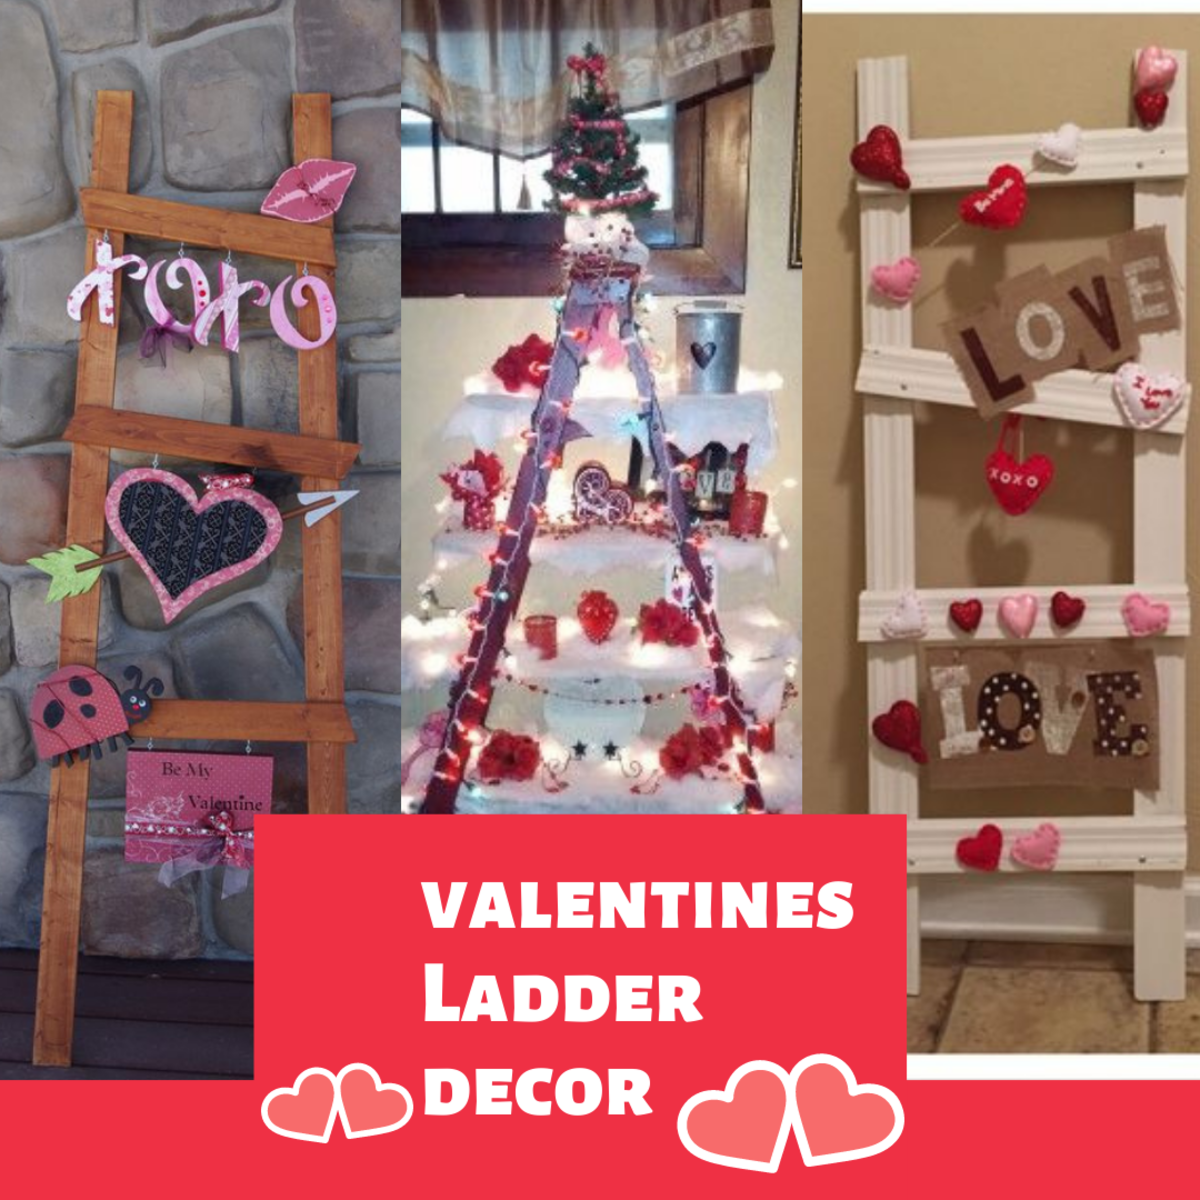 25 + Valentines Day Ladder Decorations to Make your Home look Romantic and Adorable